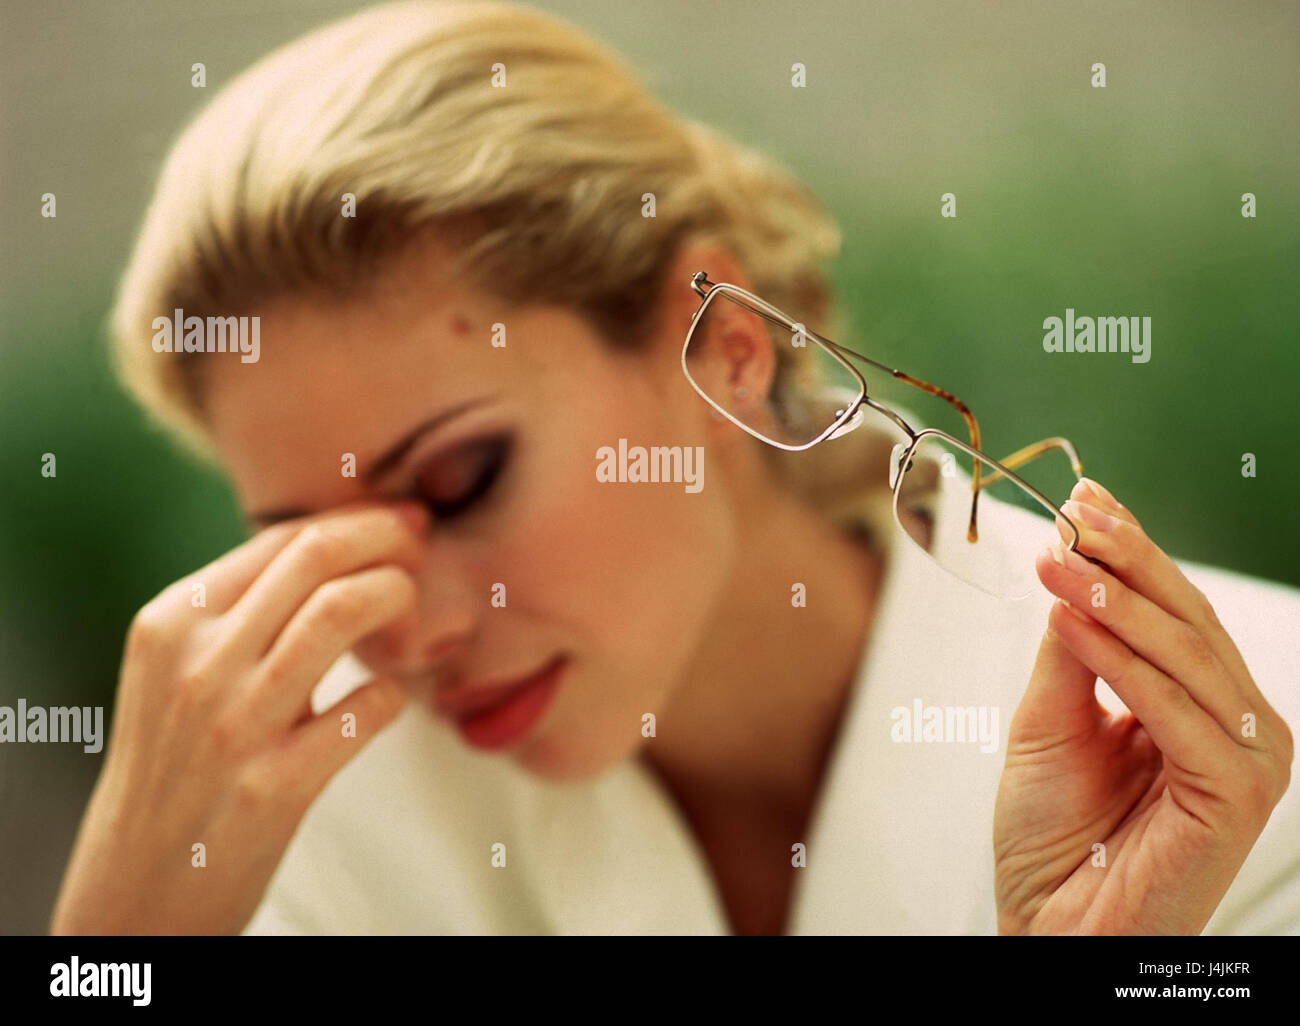 Woman, young, blond, glasses, hold, gesture, cephalalgias manager, Schmezen, head, rewrite, fatigue, overfatigue, depletion, tiredly, outside, blur Stock Photo